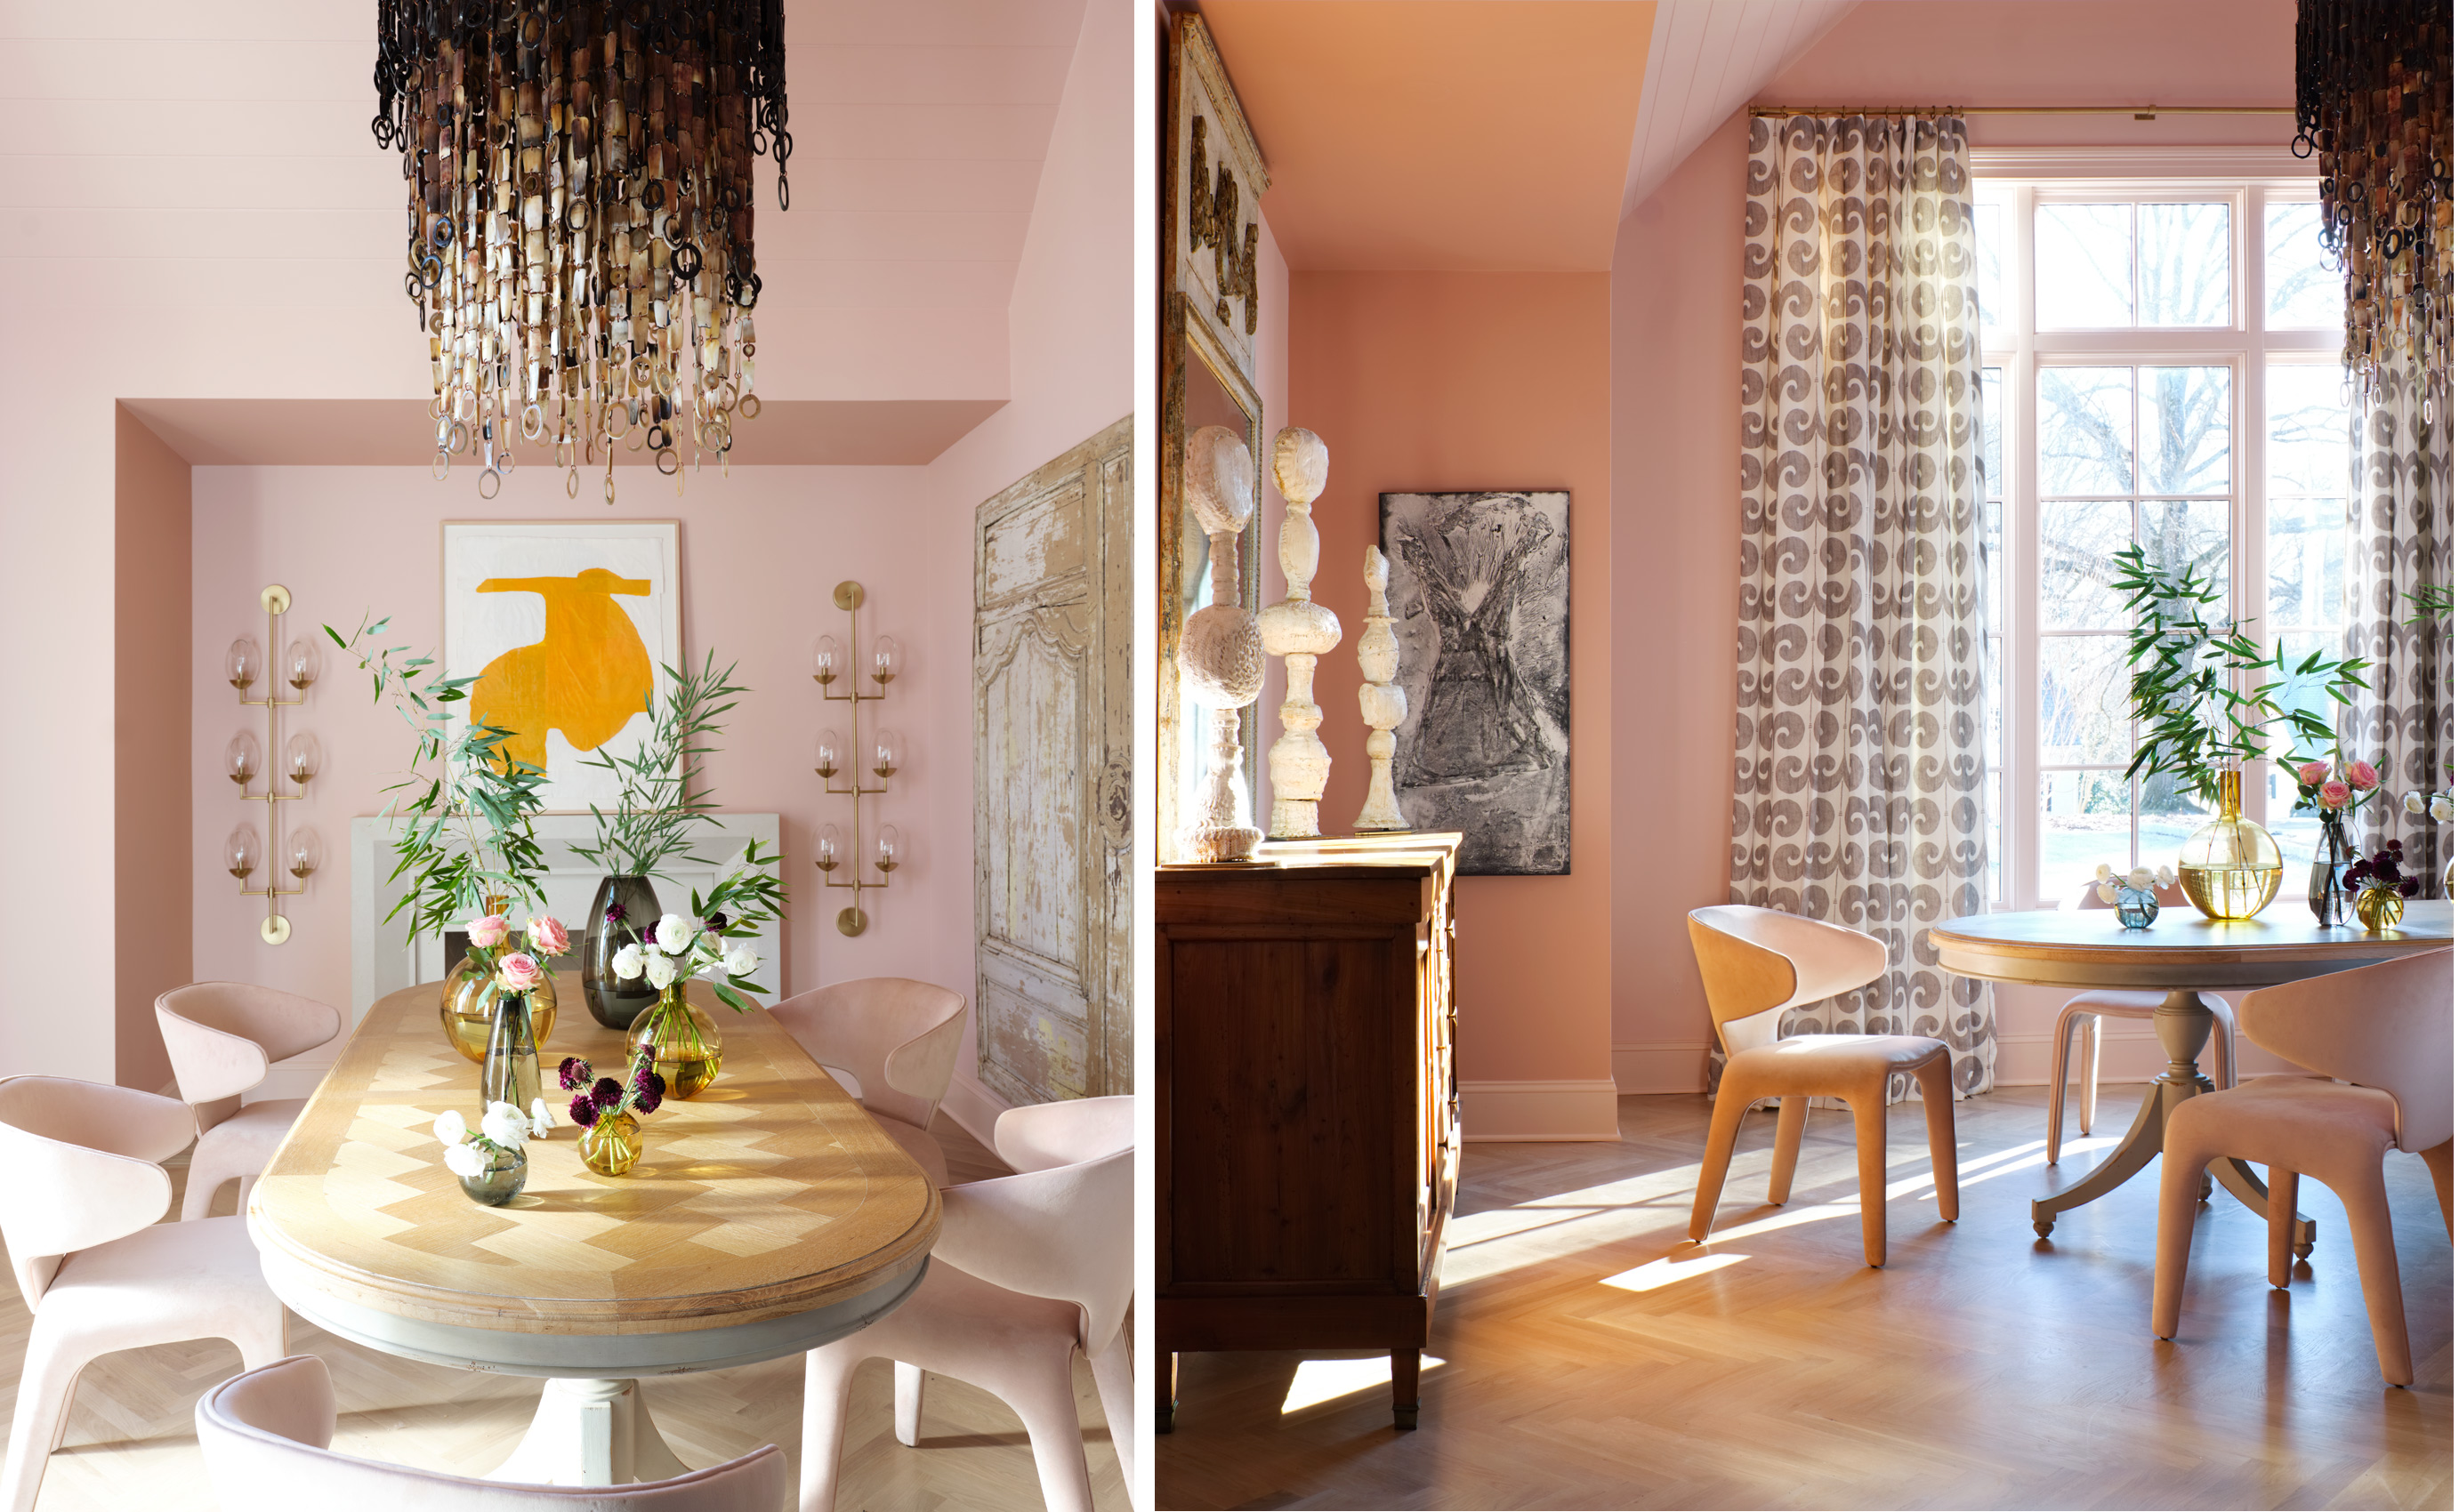 Janie Molster blush pink dining room feaatured in House Beautiful, photos by Mali Azima.